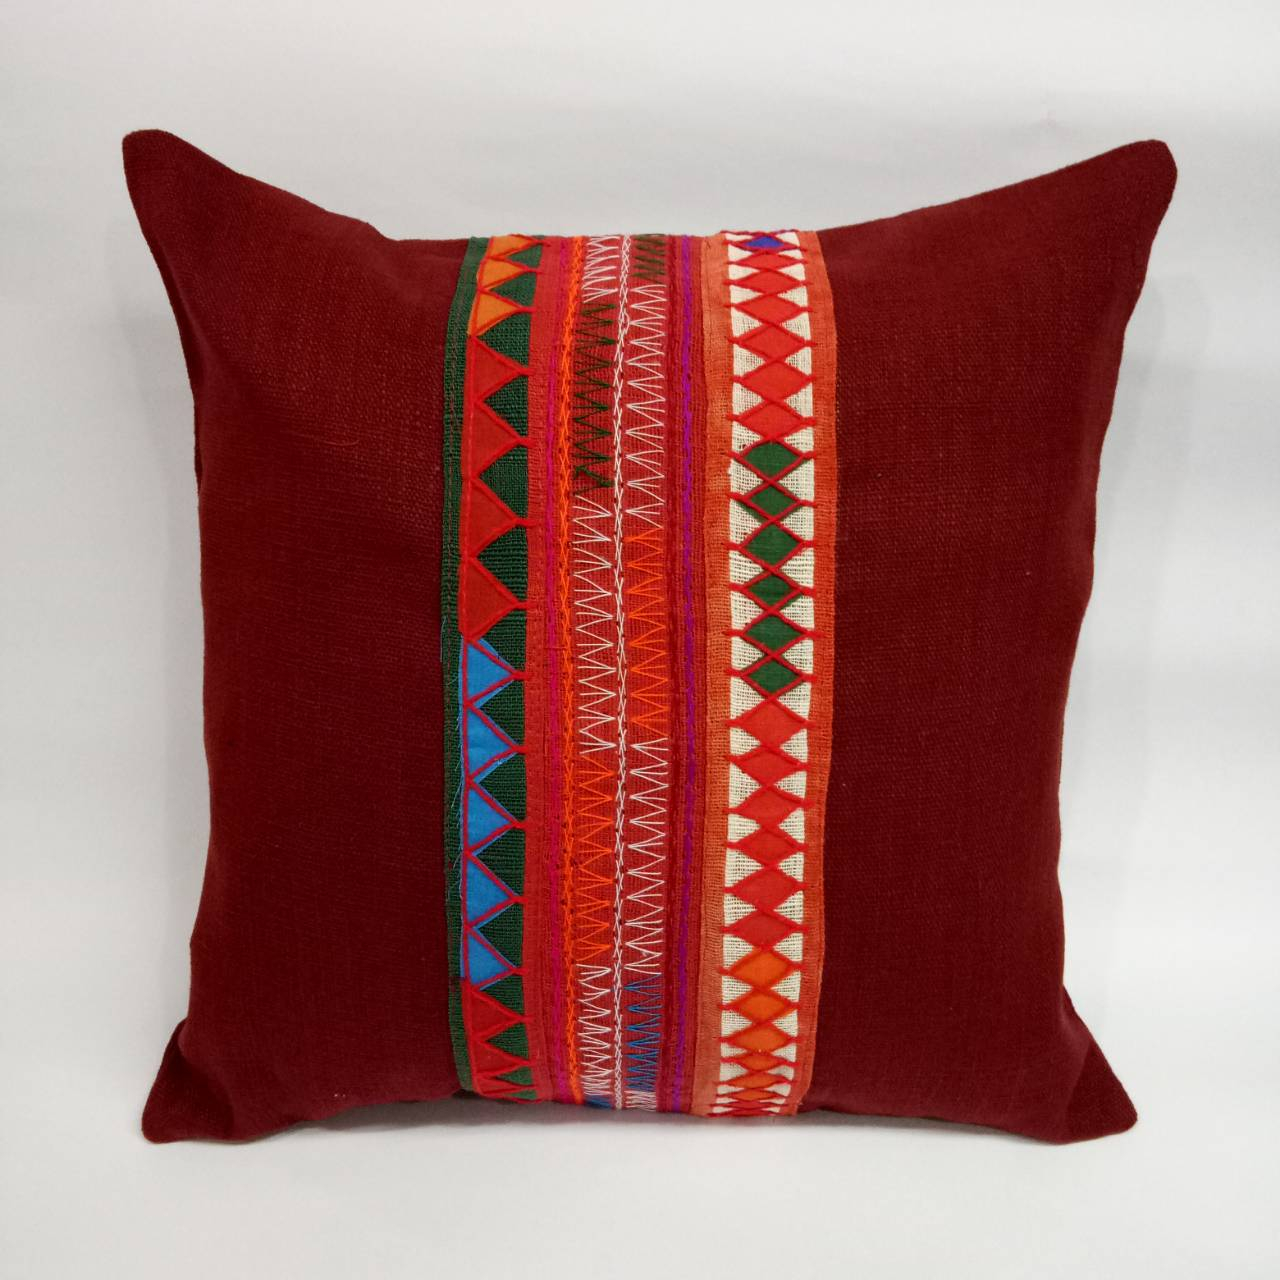 Cushion Cover Embroidery Patterns Akha Embroidery Cushion Cover